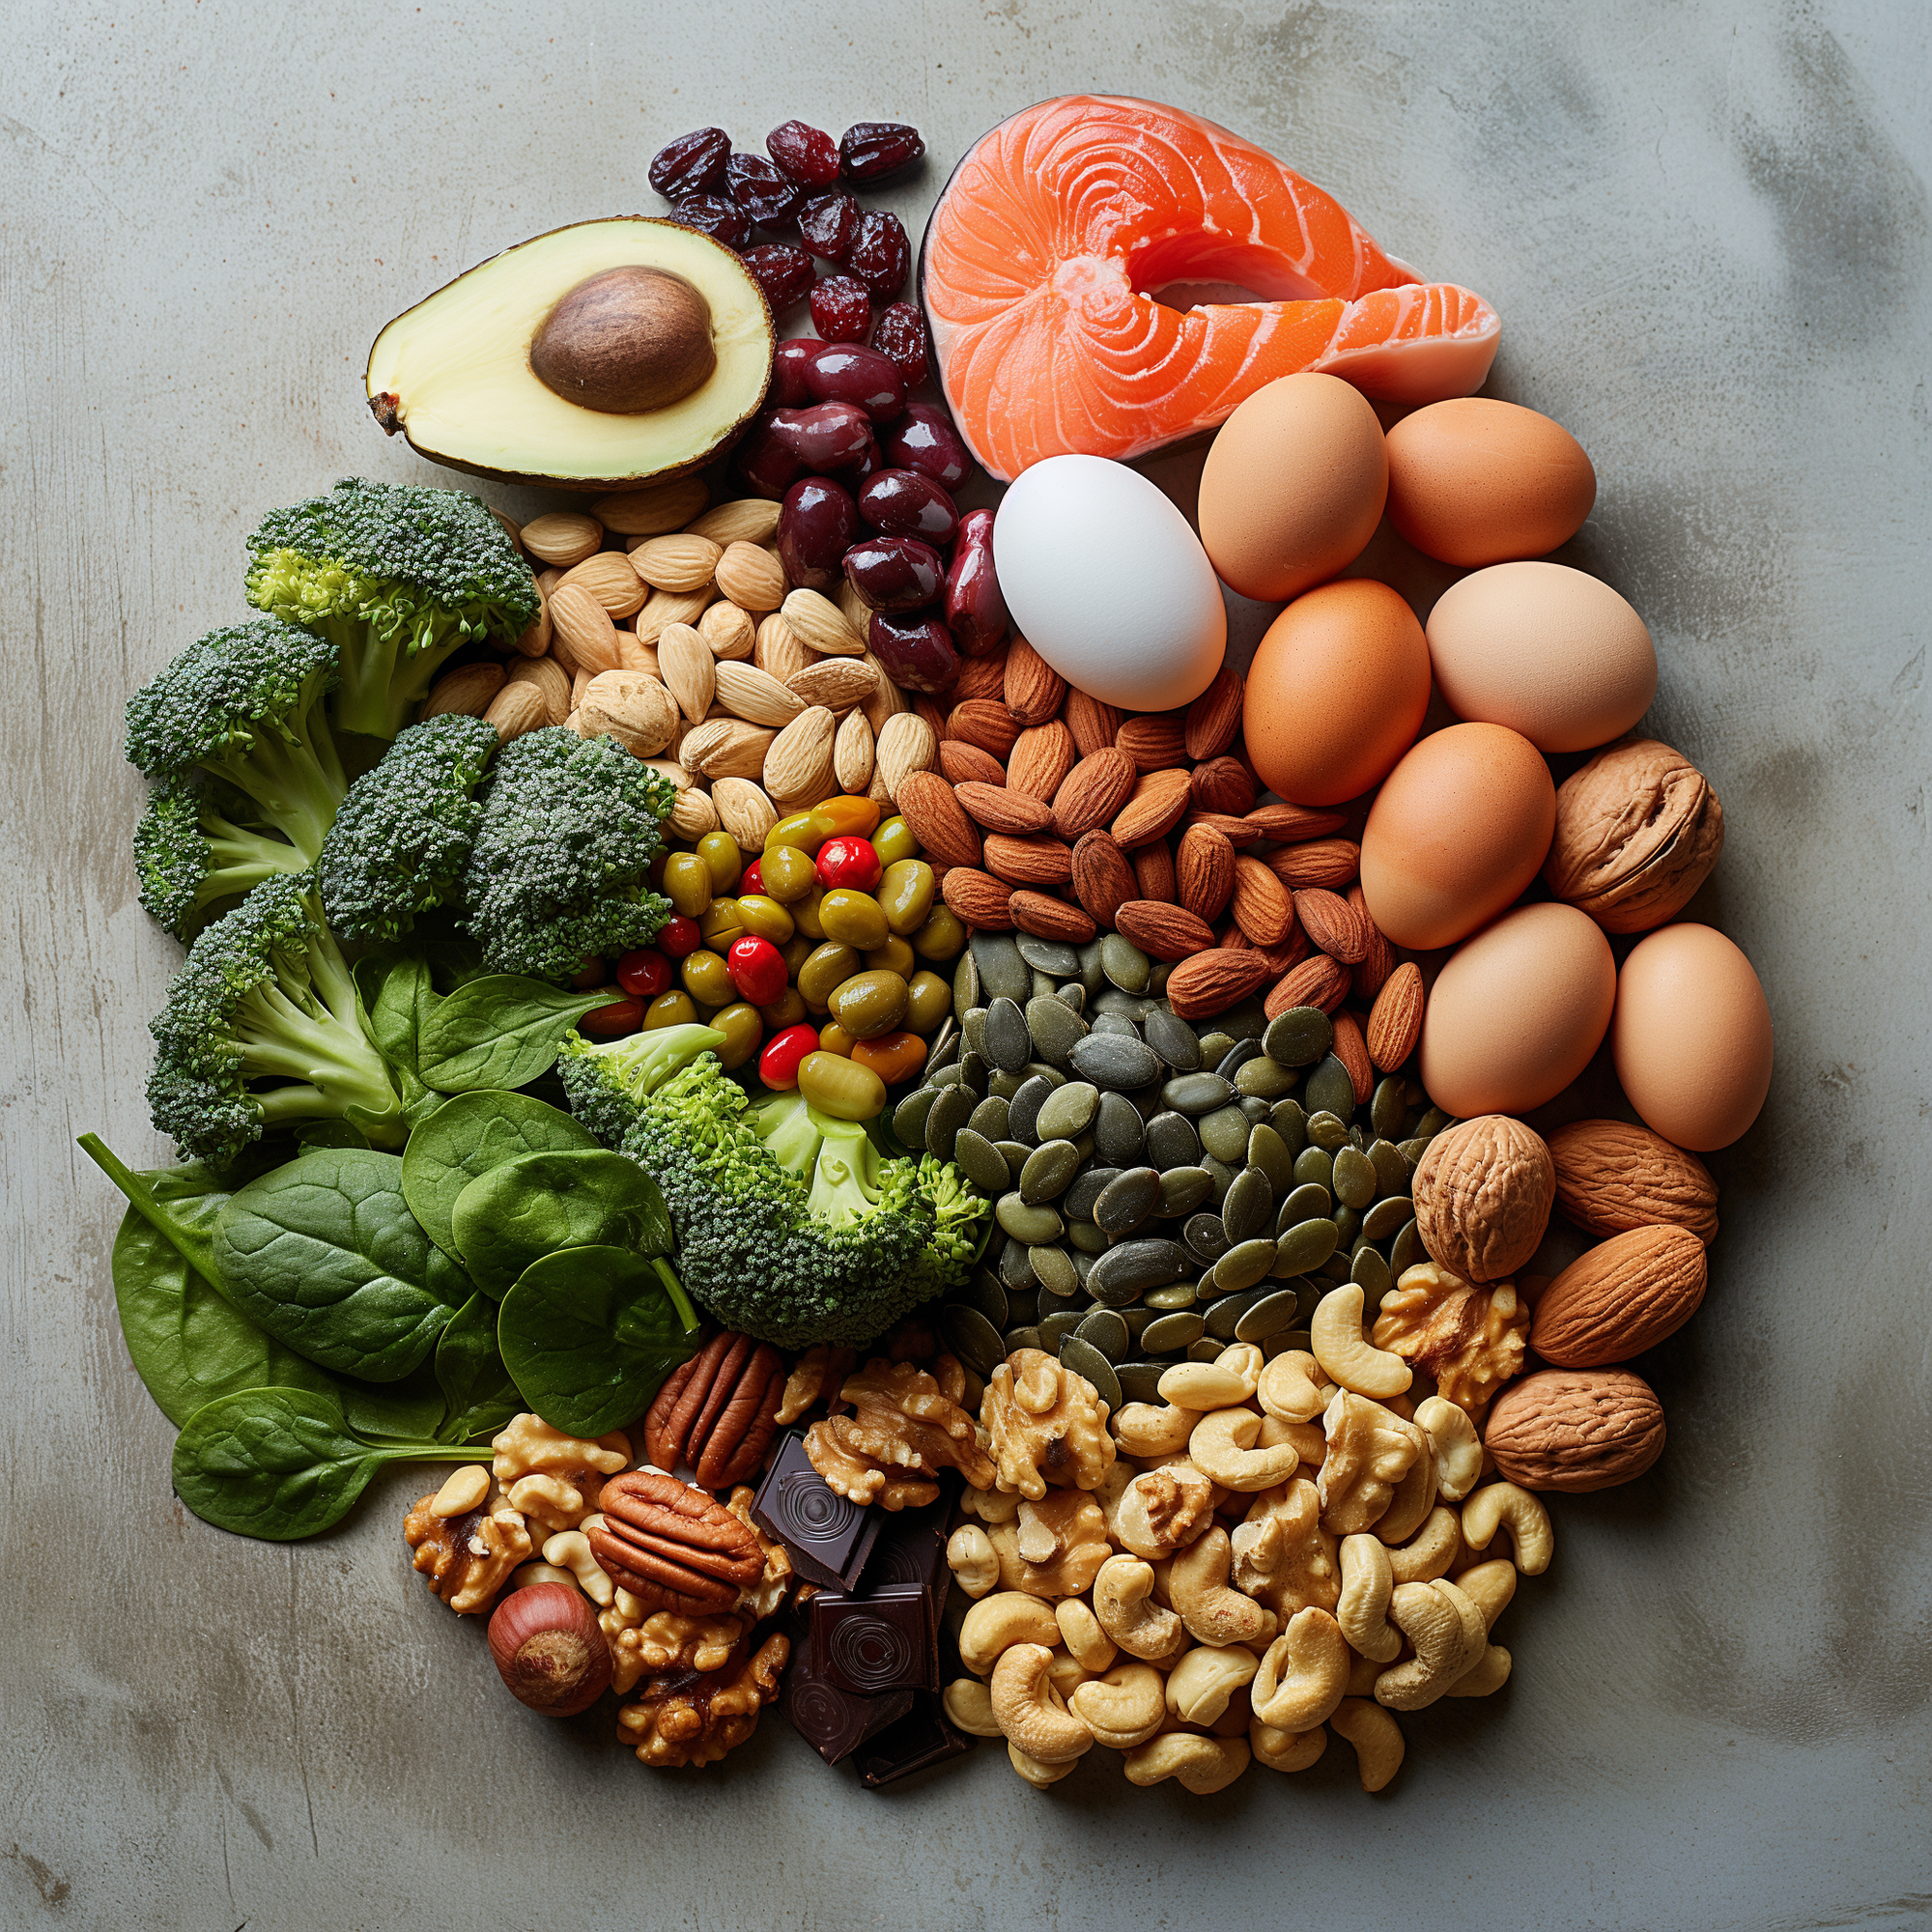 An image of various brain foods arranged on a table. These foods include avocado, salmon, eggs, walnuts, broccoli, spinach, and seeds.